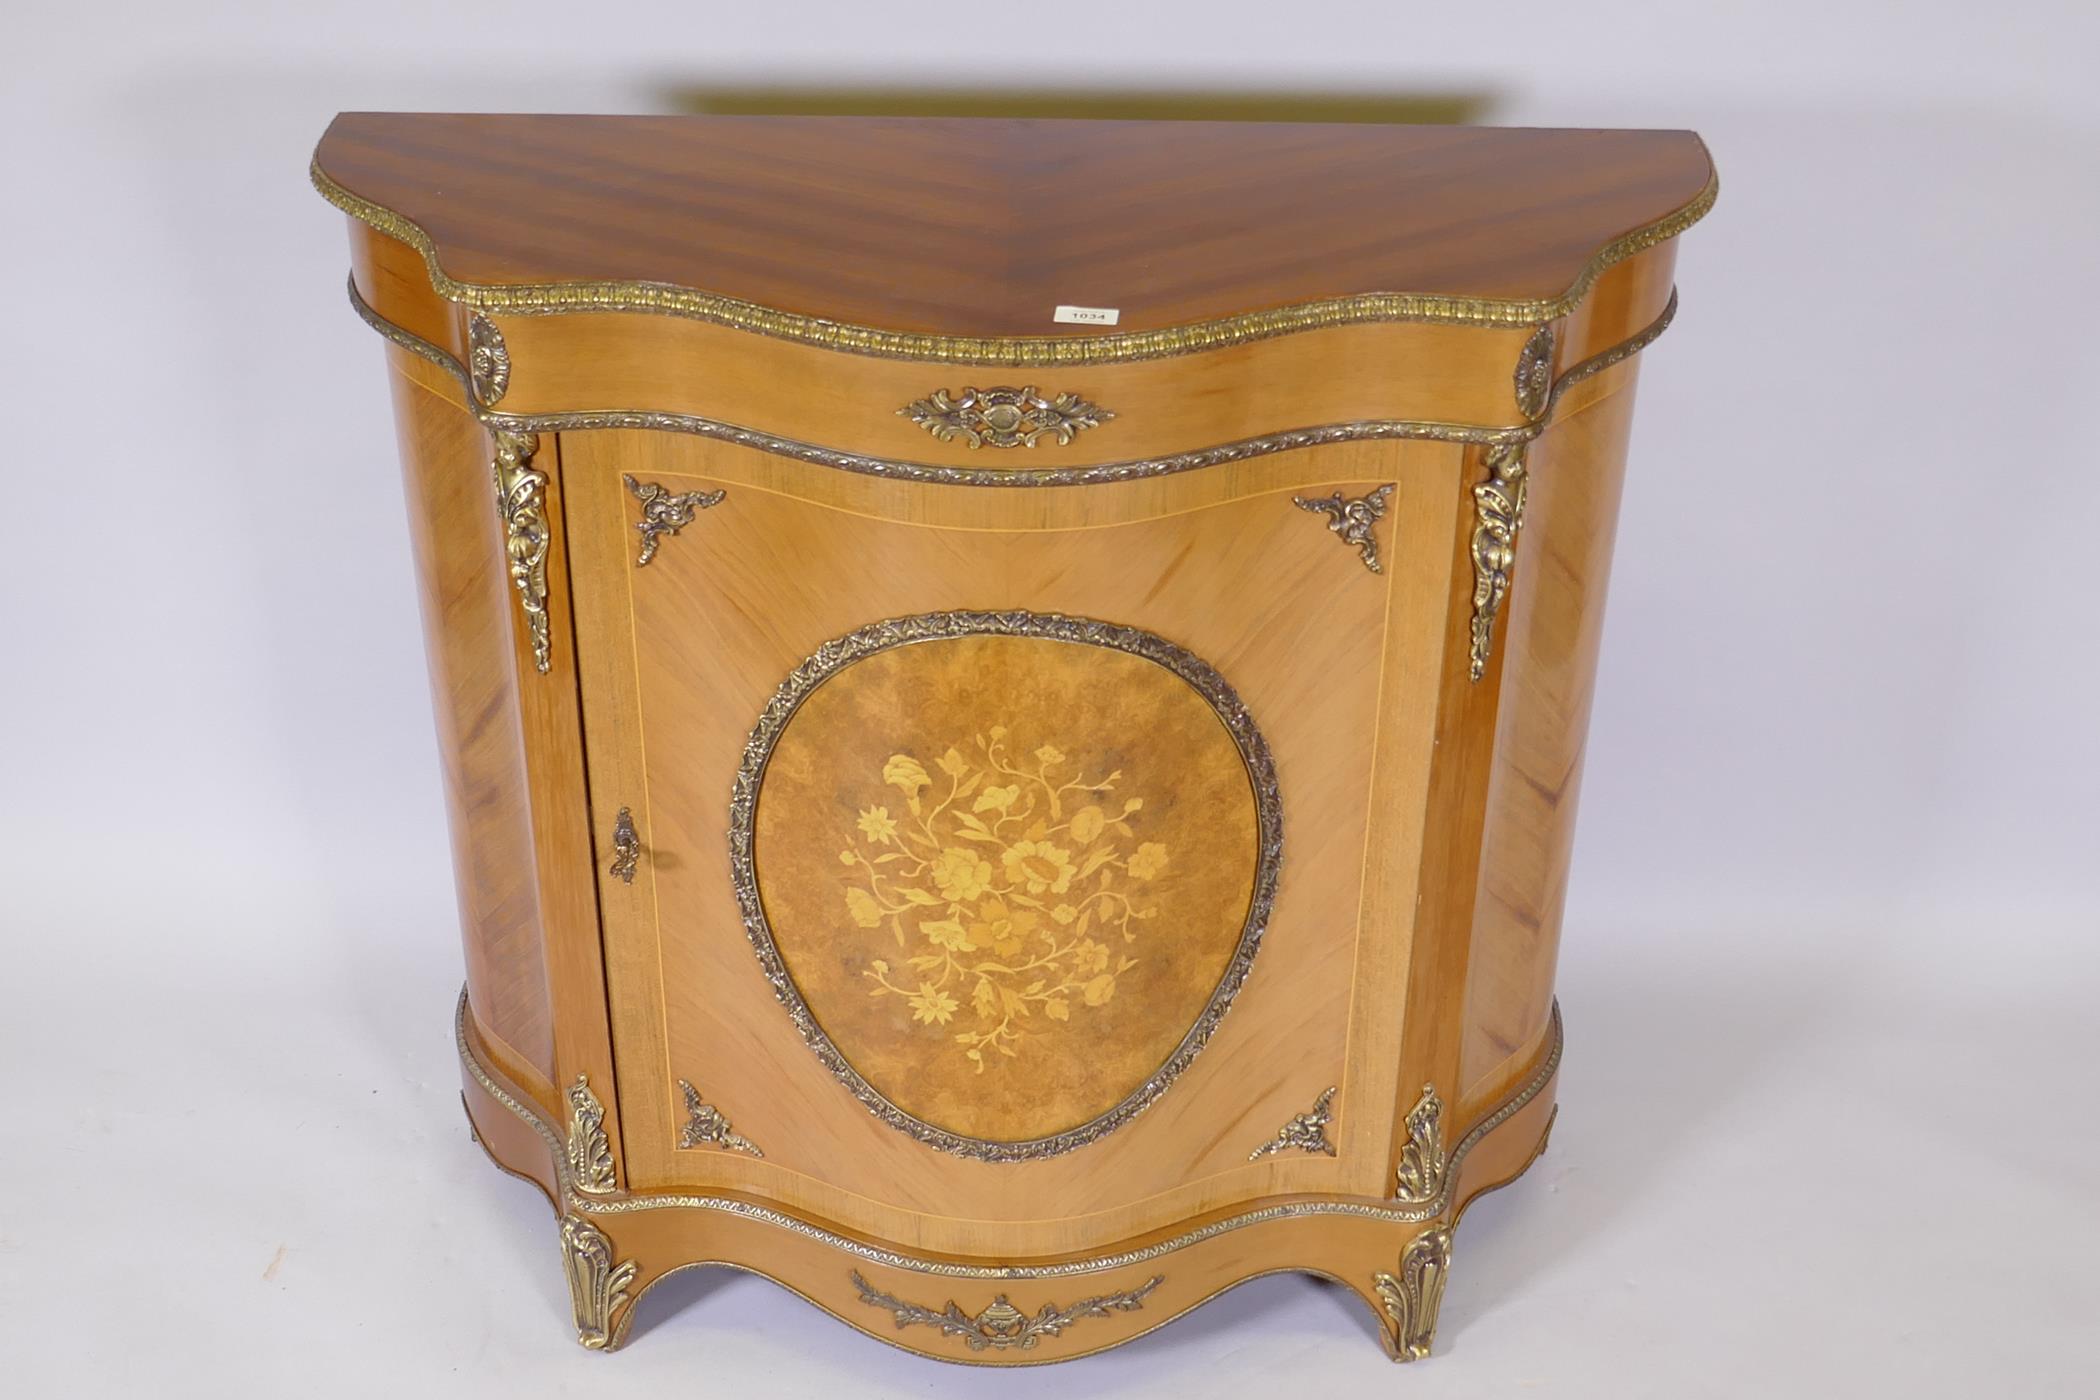 A French style tulipwood serpentine fronted cabinet with marquetry inlaid decoration and brass - Image 5 of 9